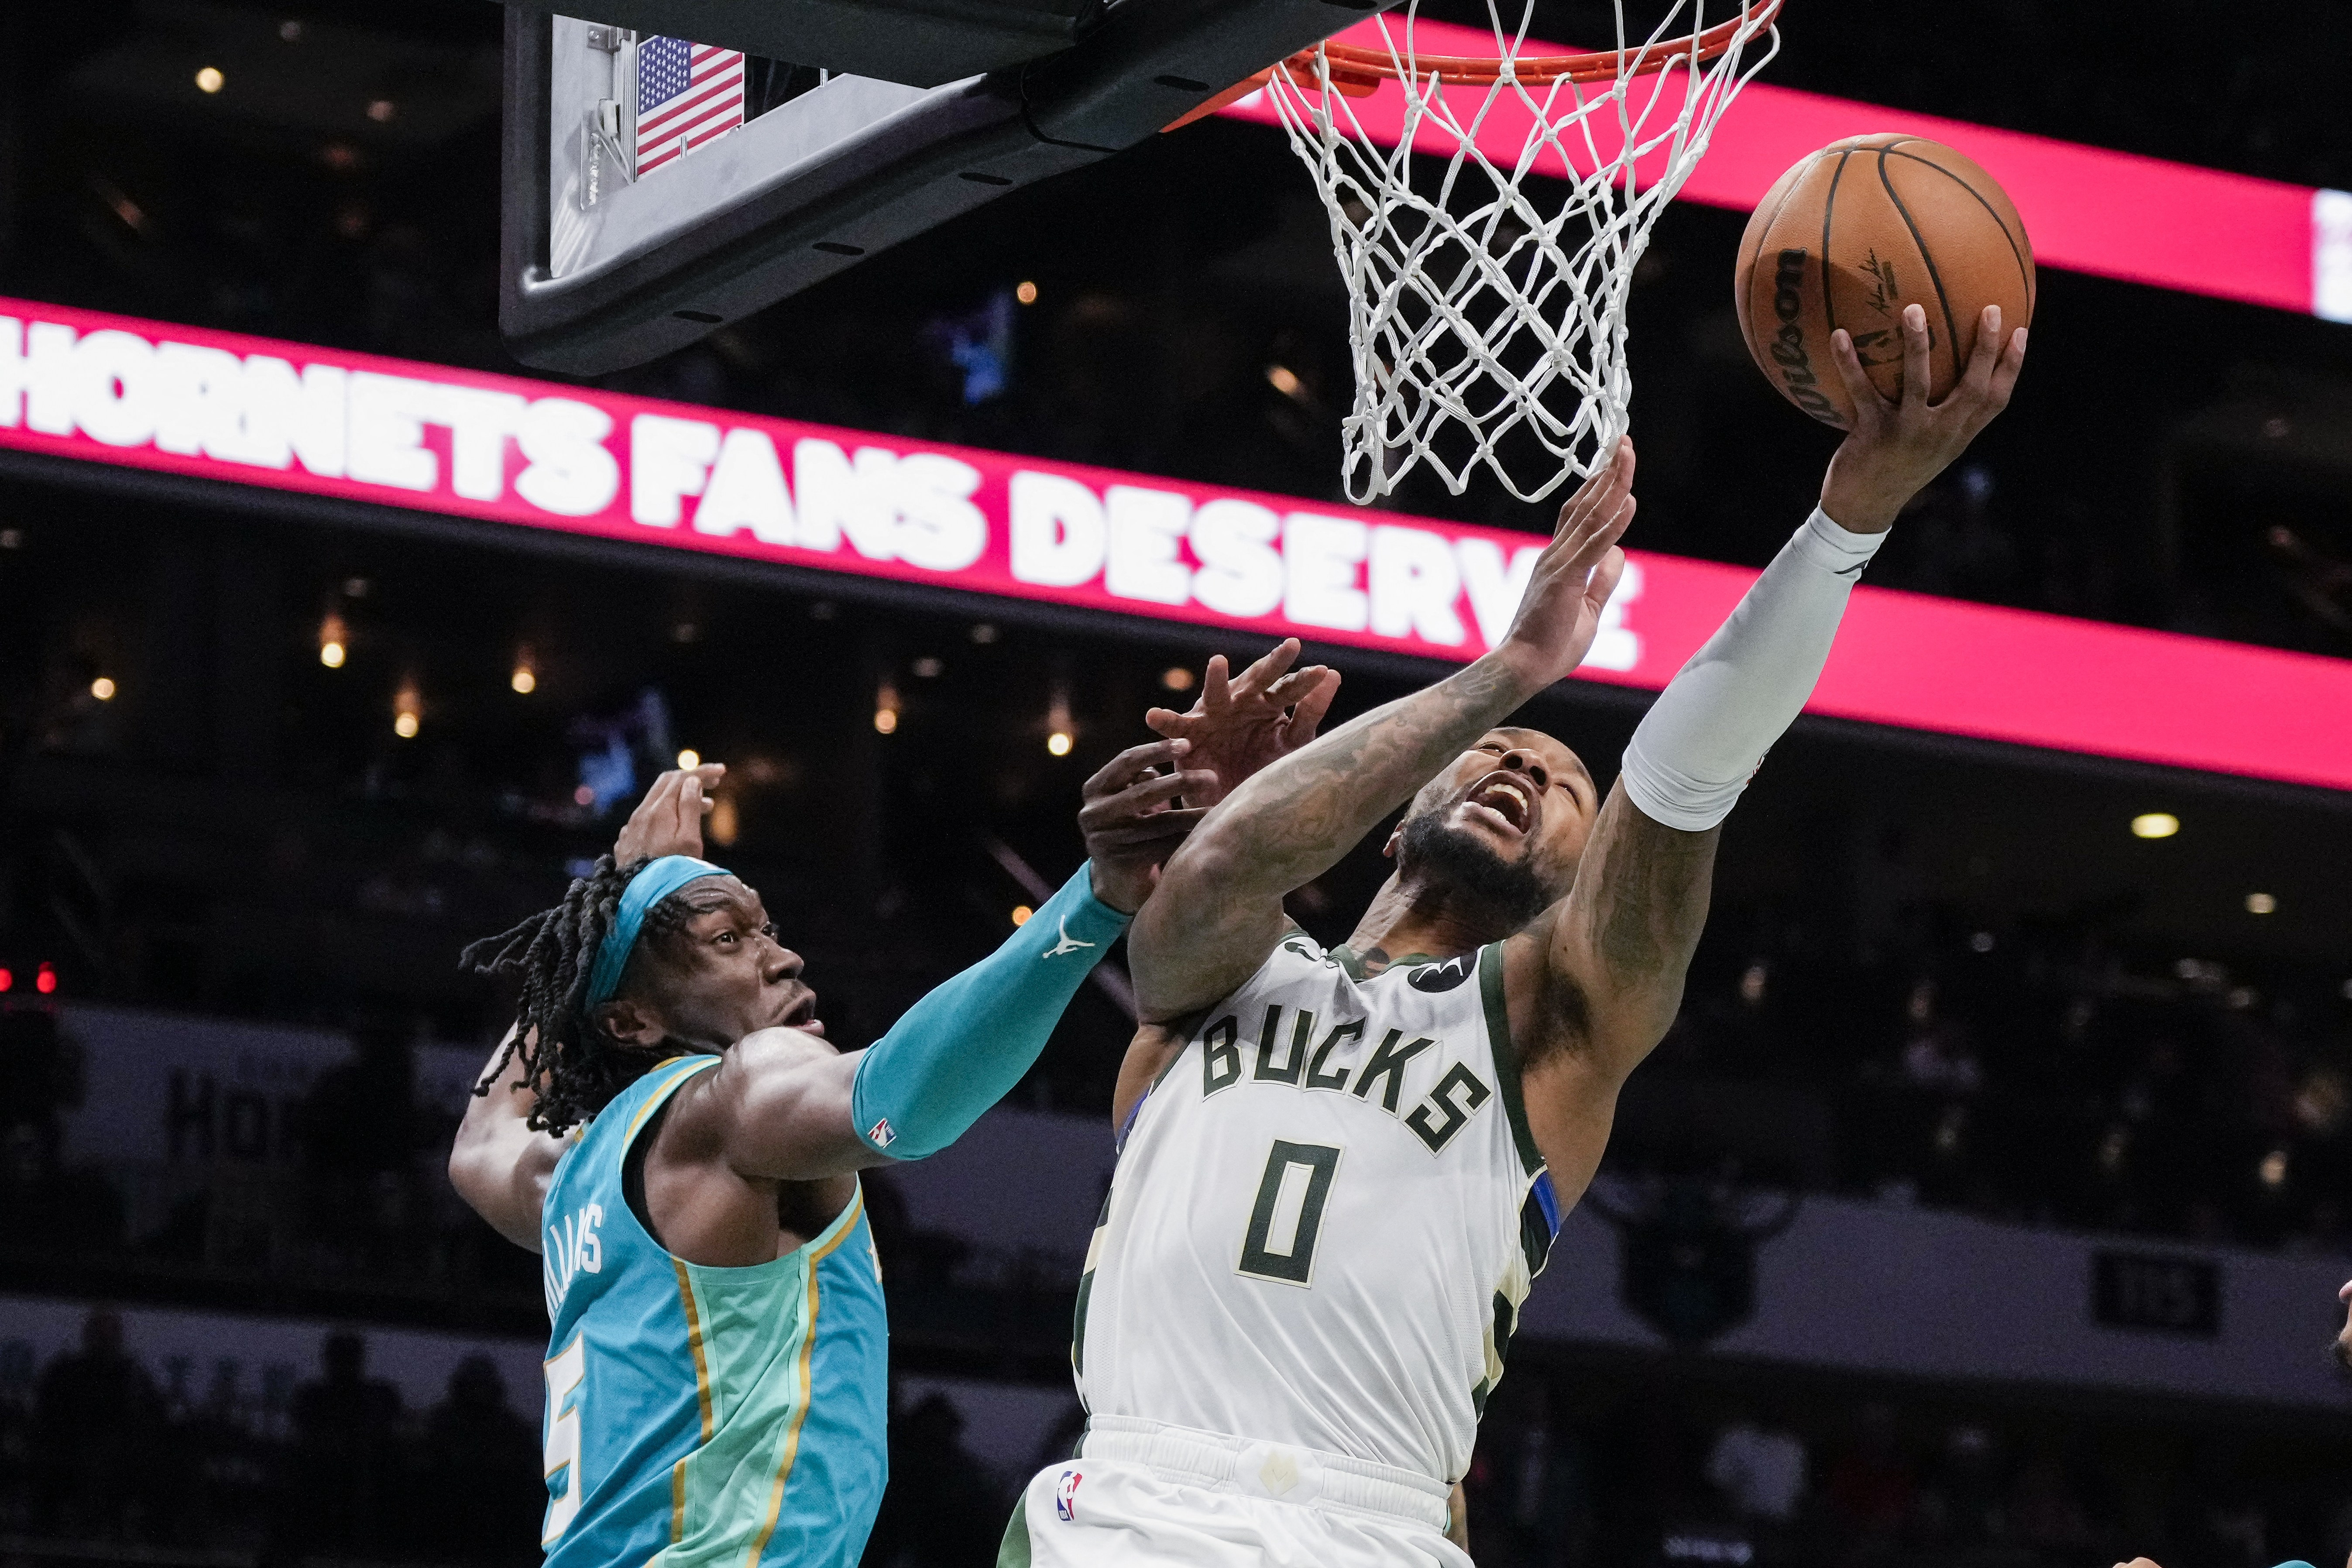 Miles Bridges' return can't save Hornets in loss to Bucks